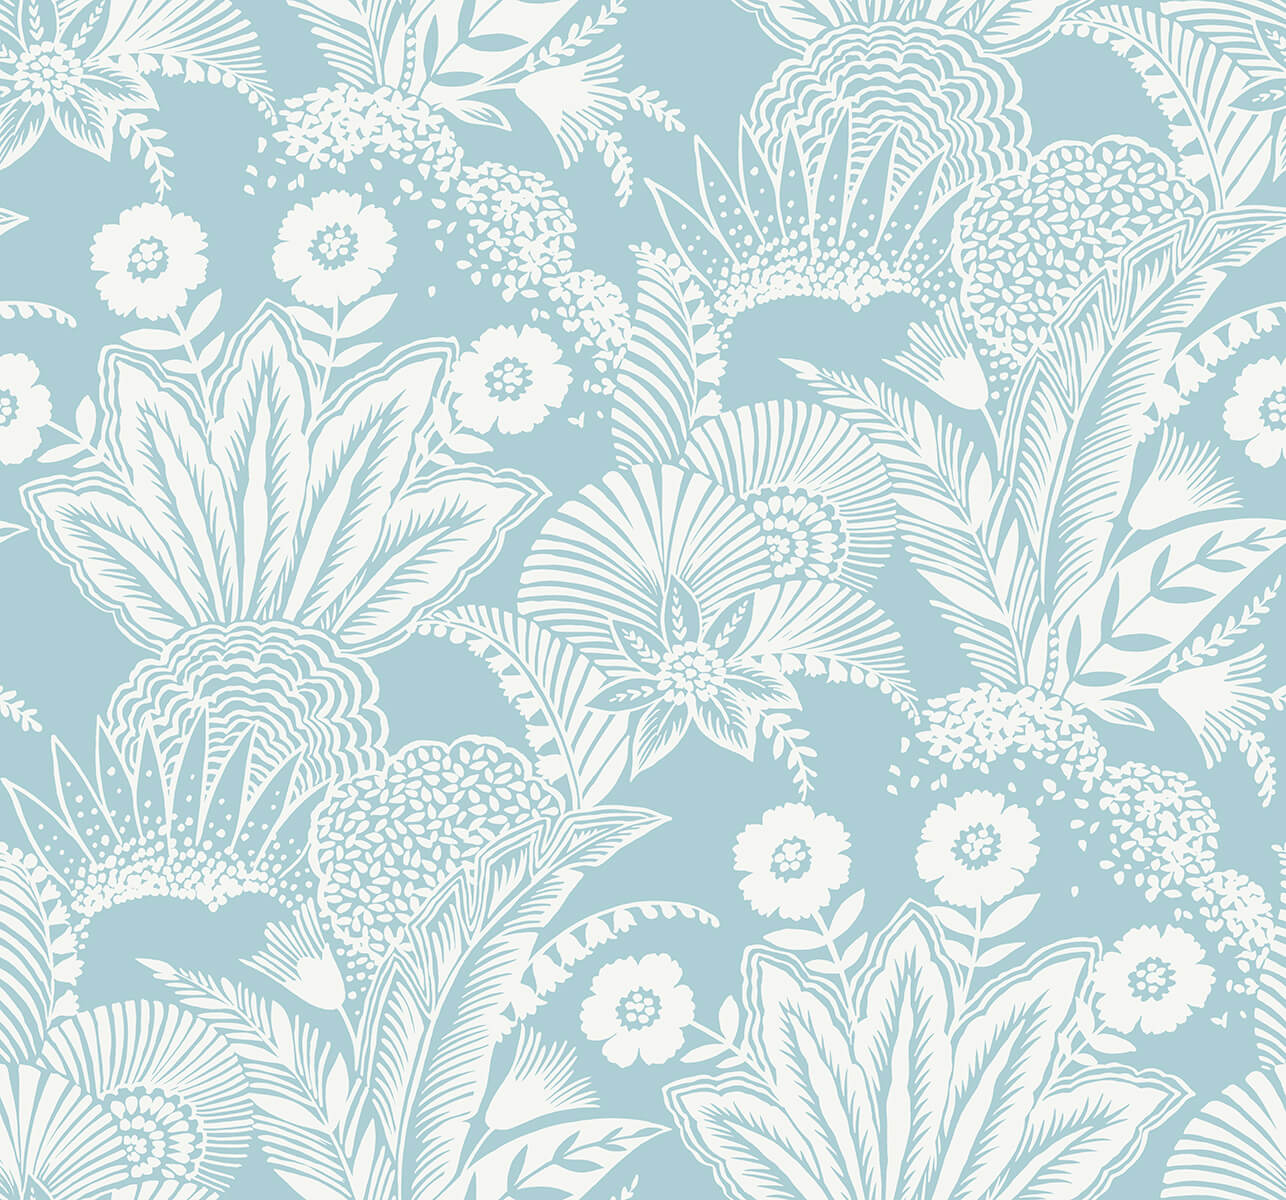 Seabrook Designs Summer House Wallpaper Collection - SAMPLE